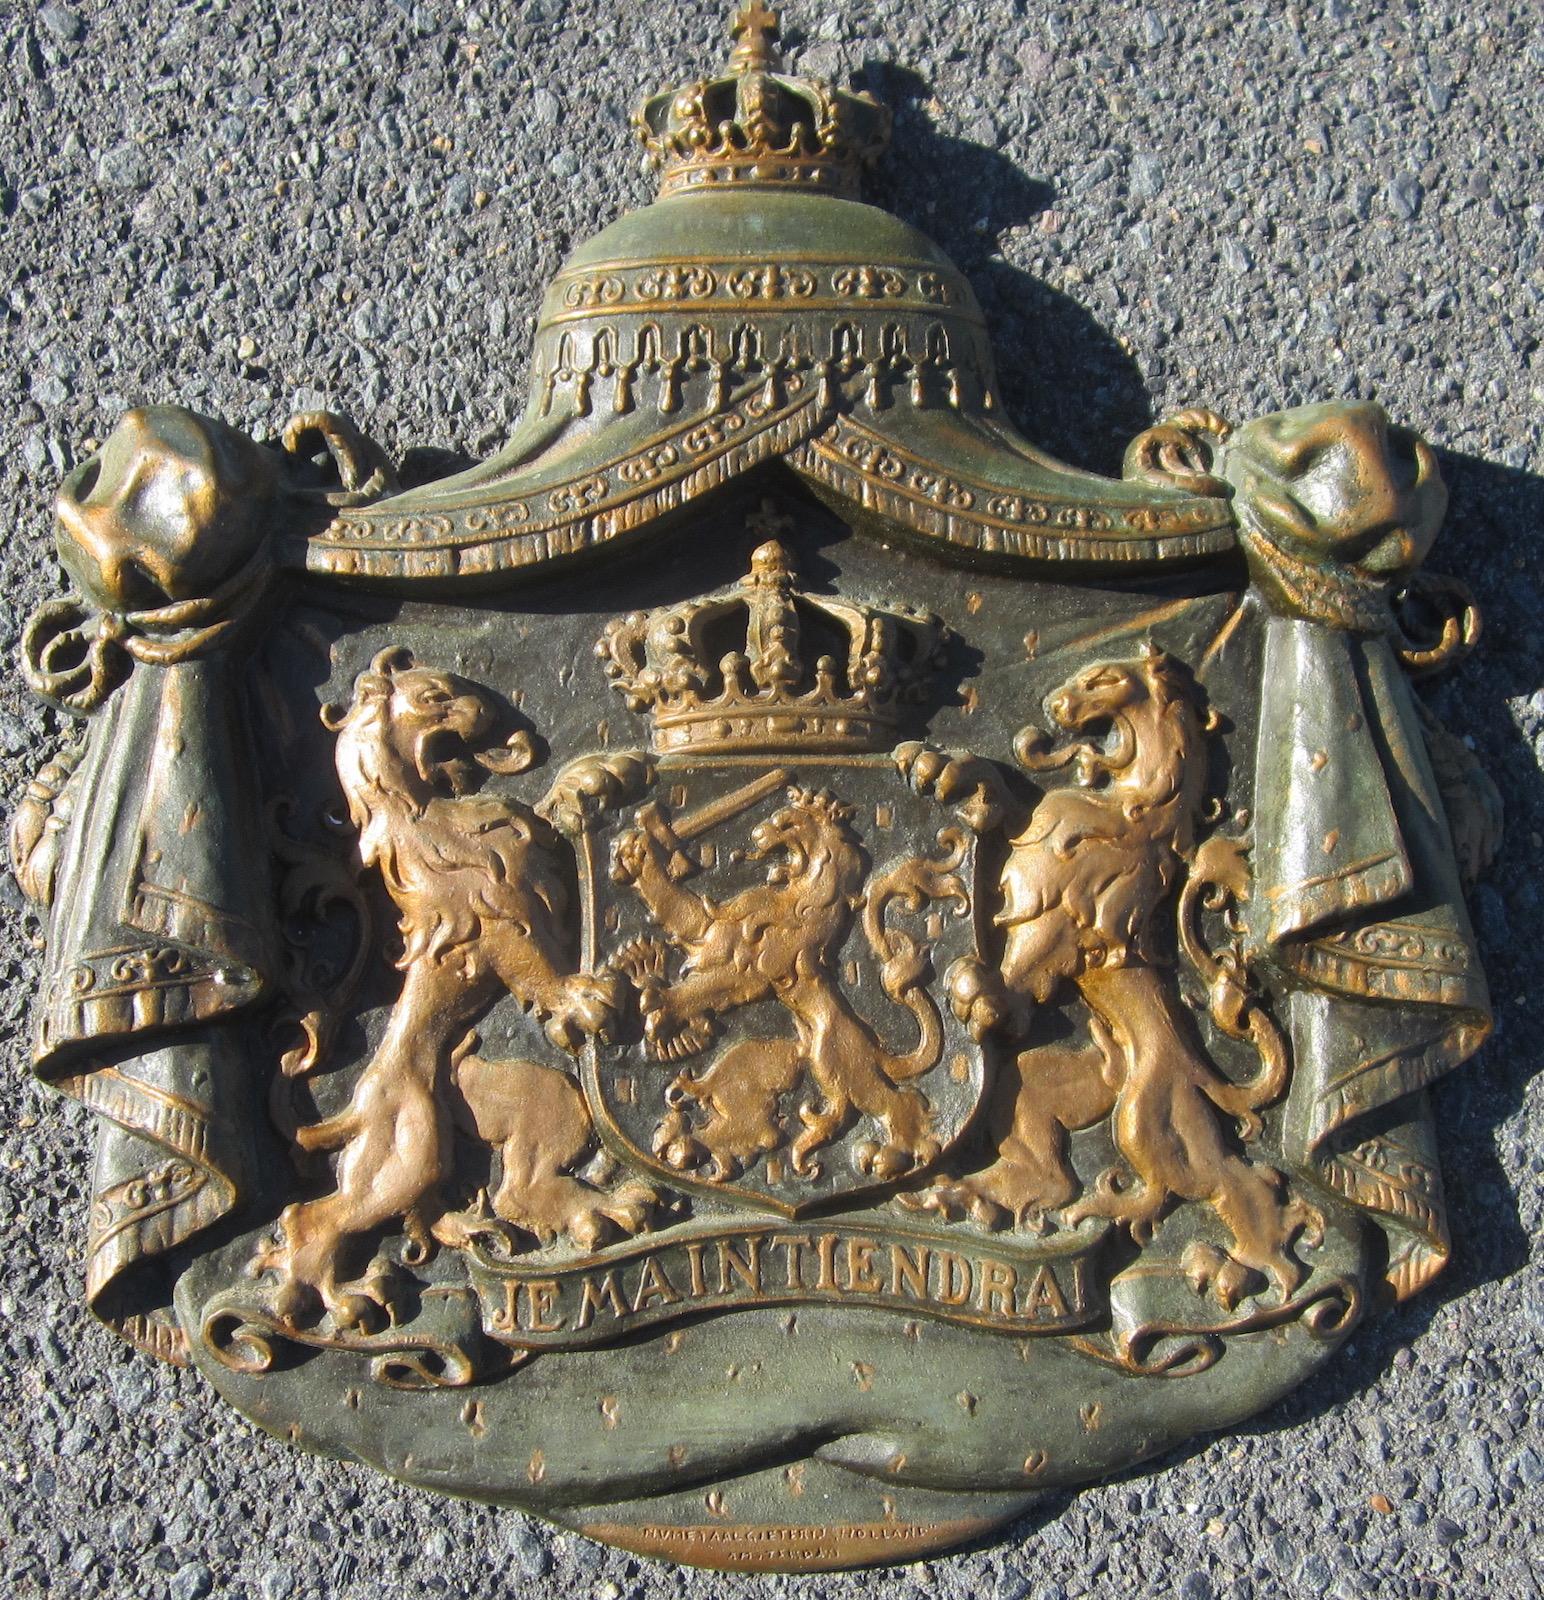 Dutch bronze cold painted Coat of Arms, 
inscribed JE MAINTIENDRAI, 
foundry mark NV METAALGITERIJ HOLLAND AMSTERDAM, 
weighs 210 ounces, 5,900 grams.
 